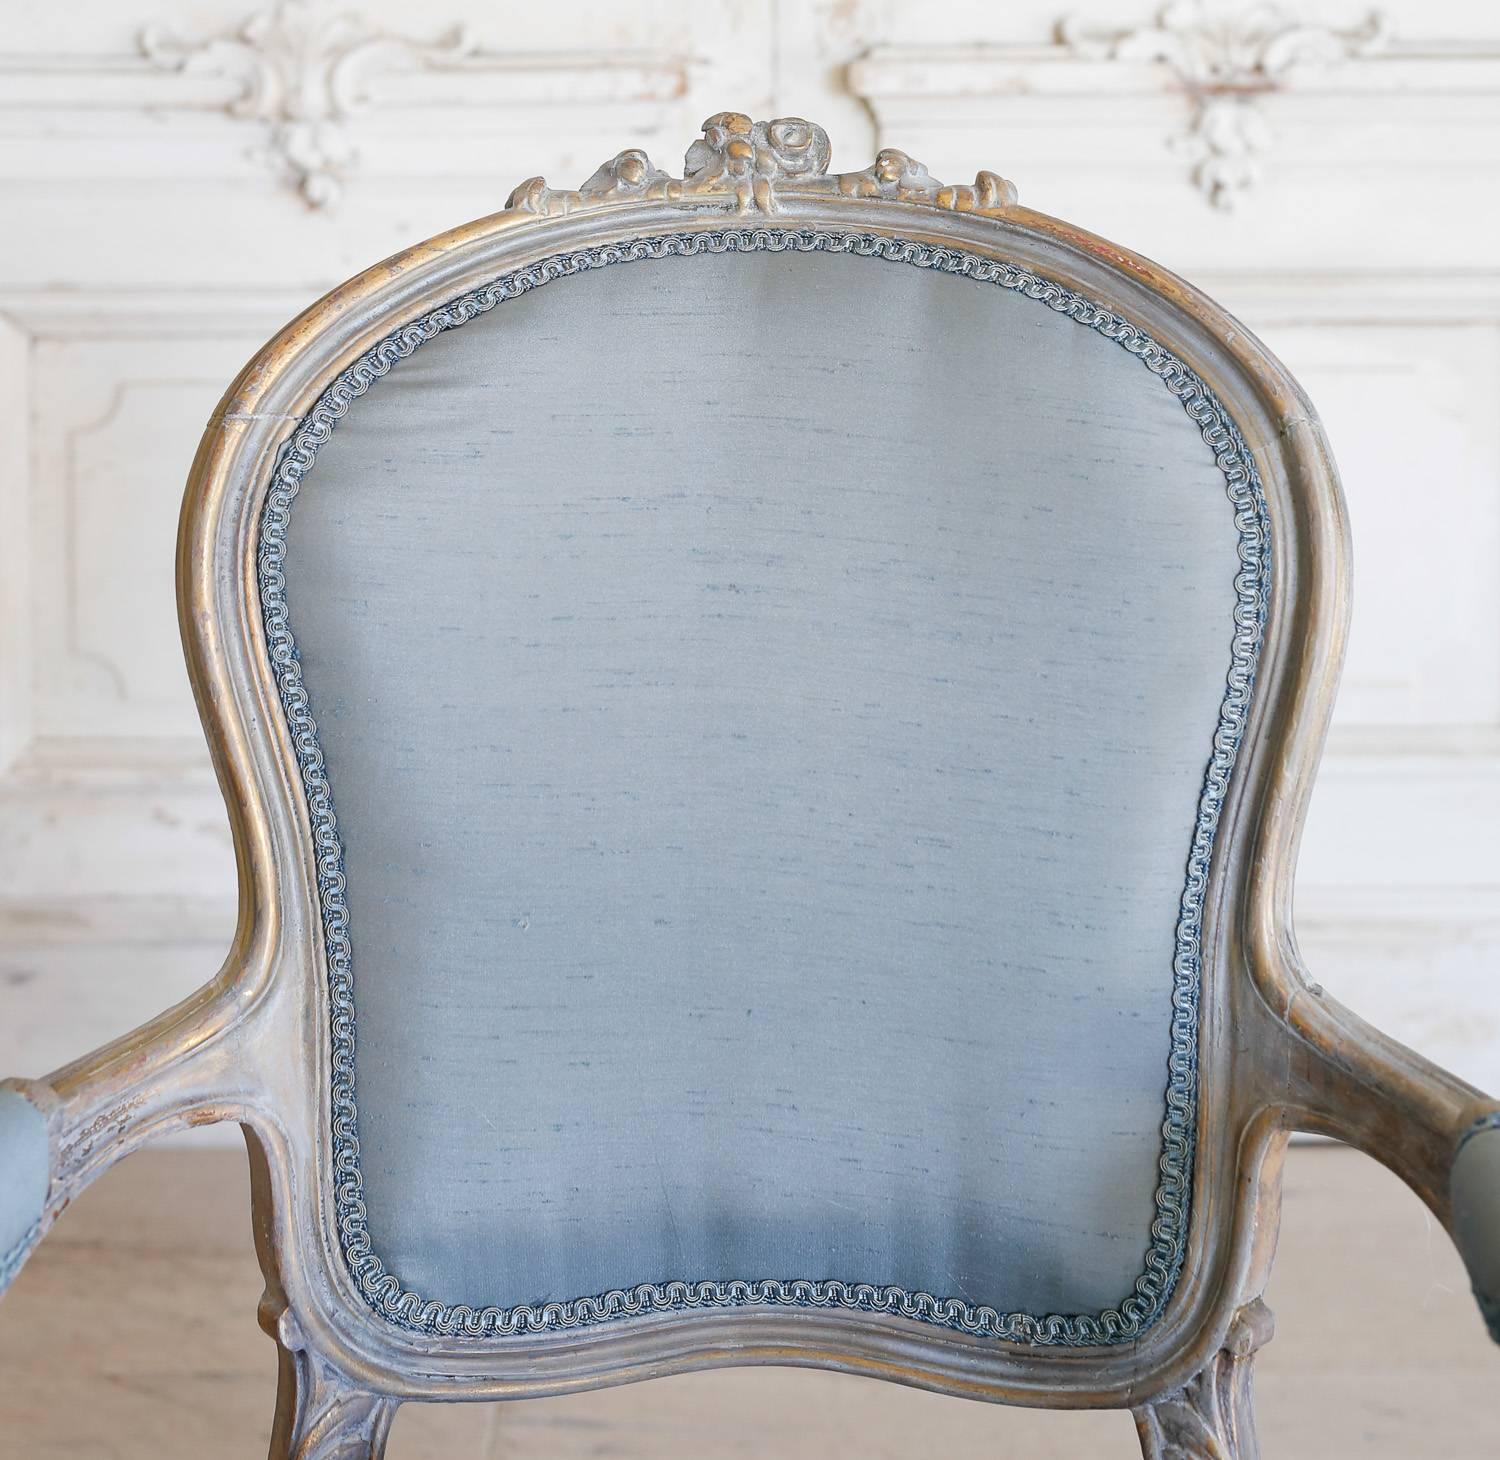 Gorgeous pair of vintage armchairs upholstered in blue silk and finished in a white washed, distressed wood frame. Two rosebuds adorn the crest and scroll down to a carved, floral apron. The Louis XV legs offer a comfortable balance while keeping